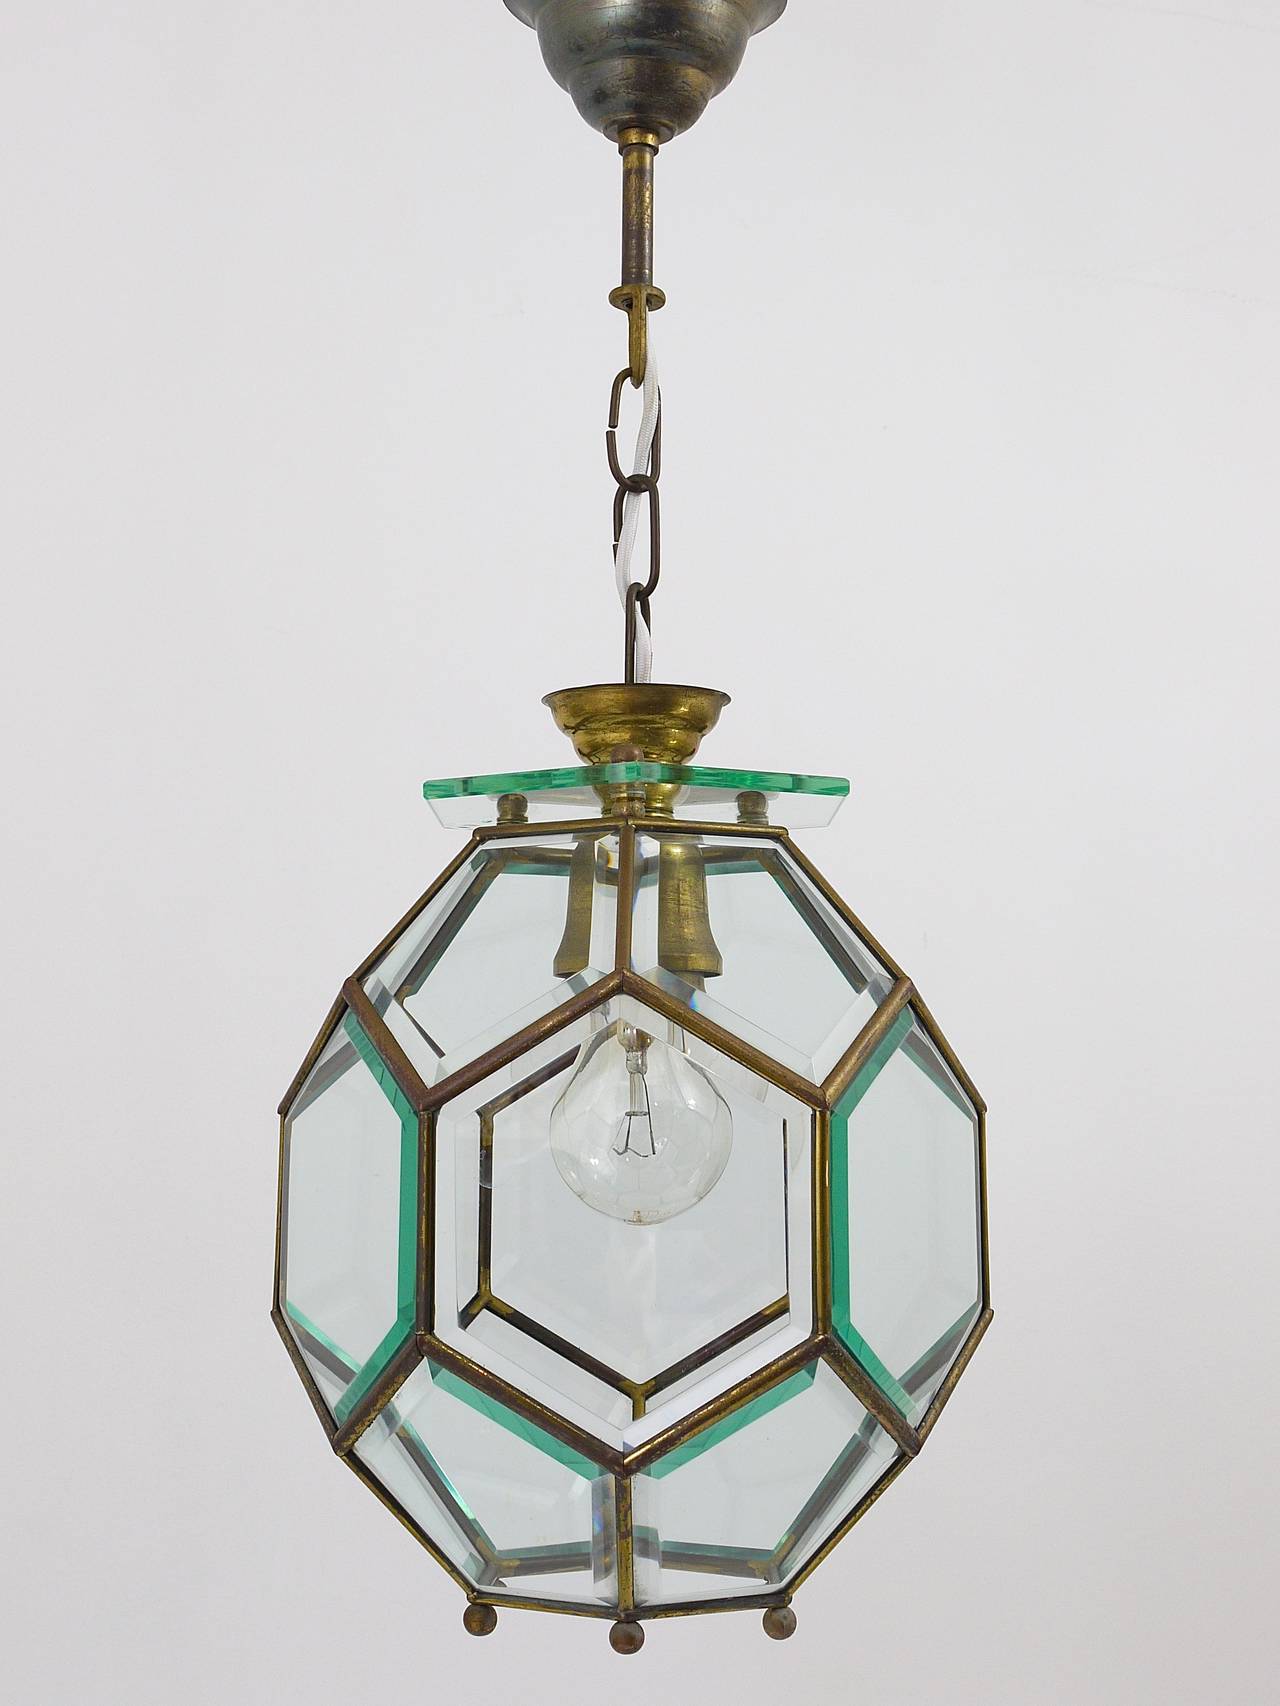 Austrian Art Nouveau Secessionist Pendant Lamp in the Manner of Adolf Loos, Knize